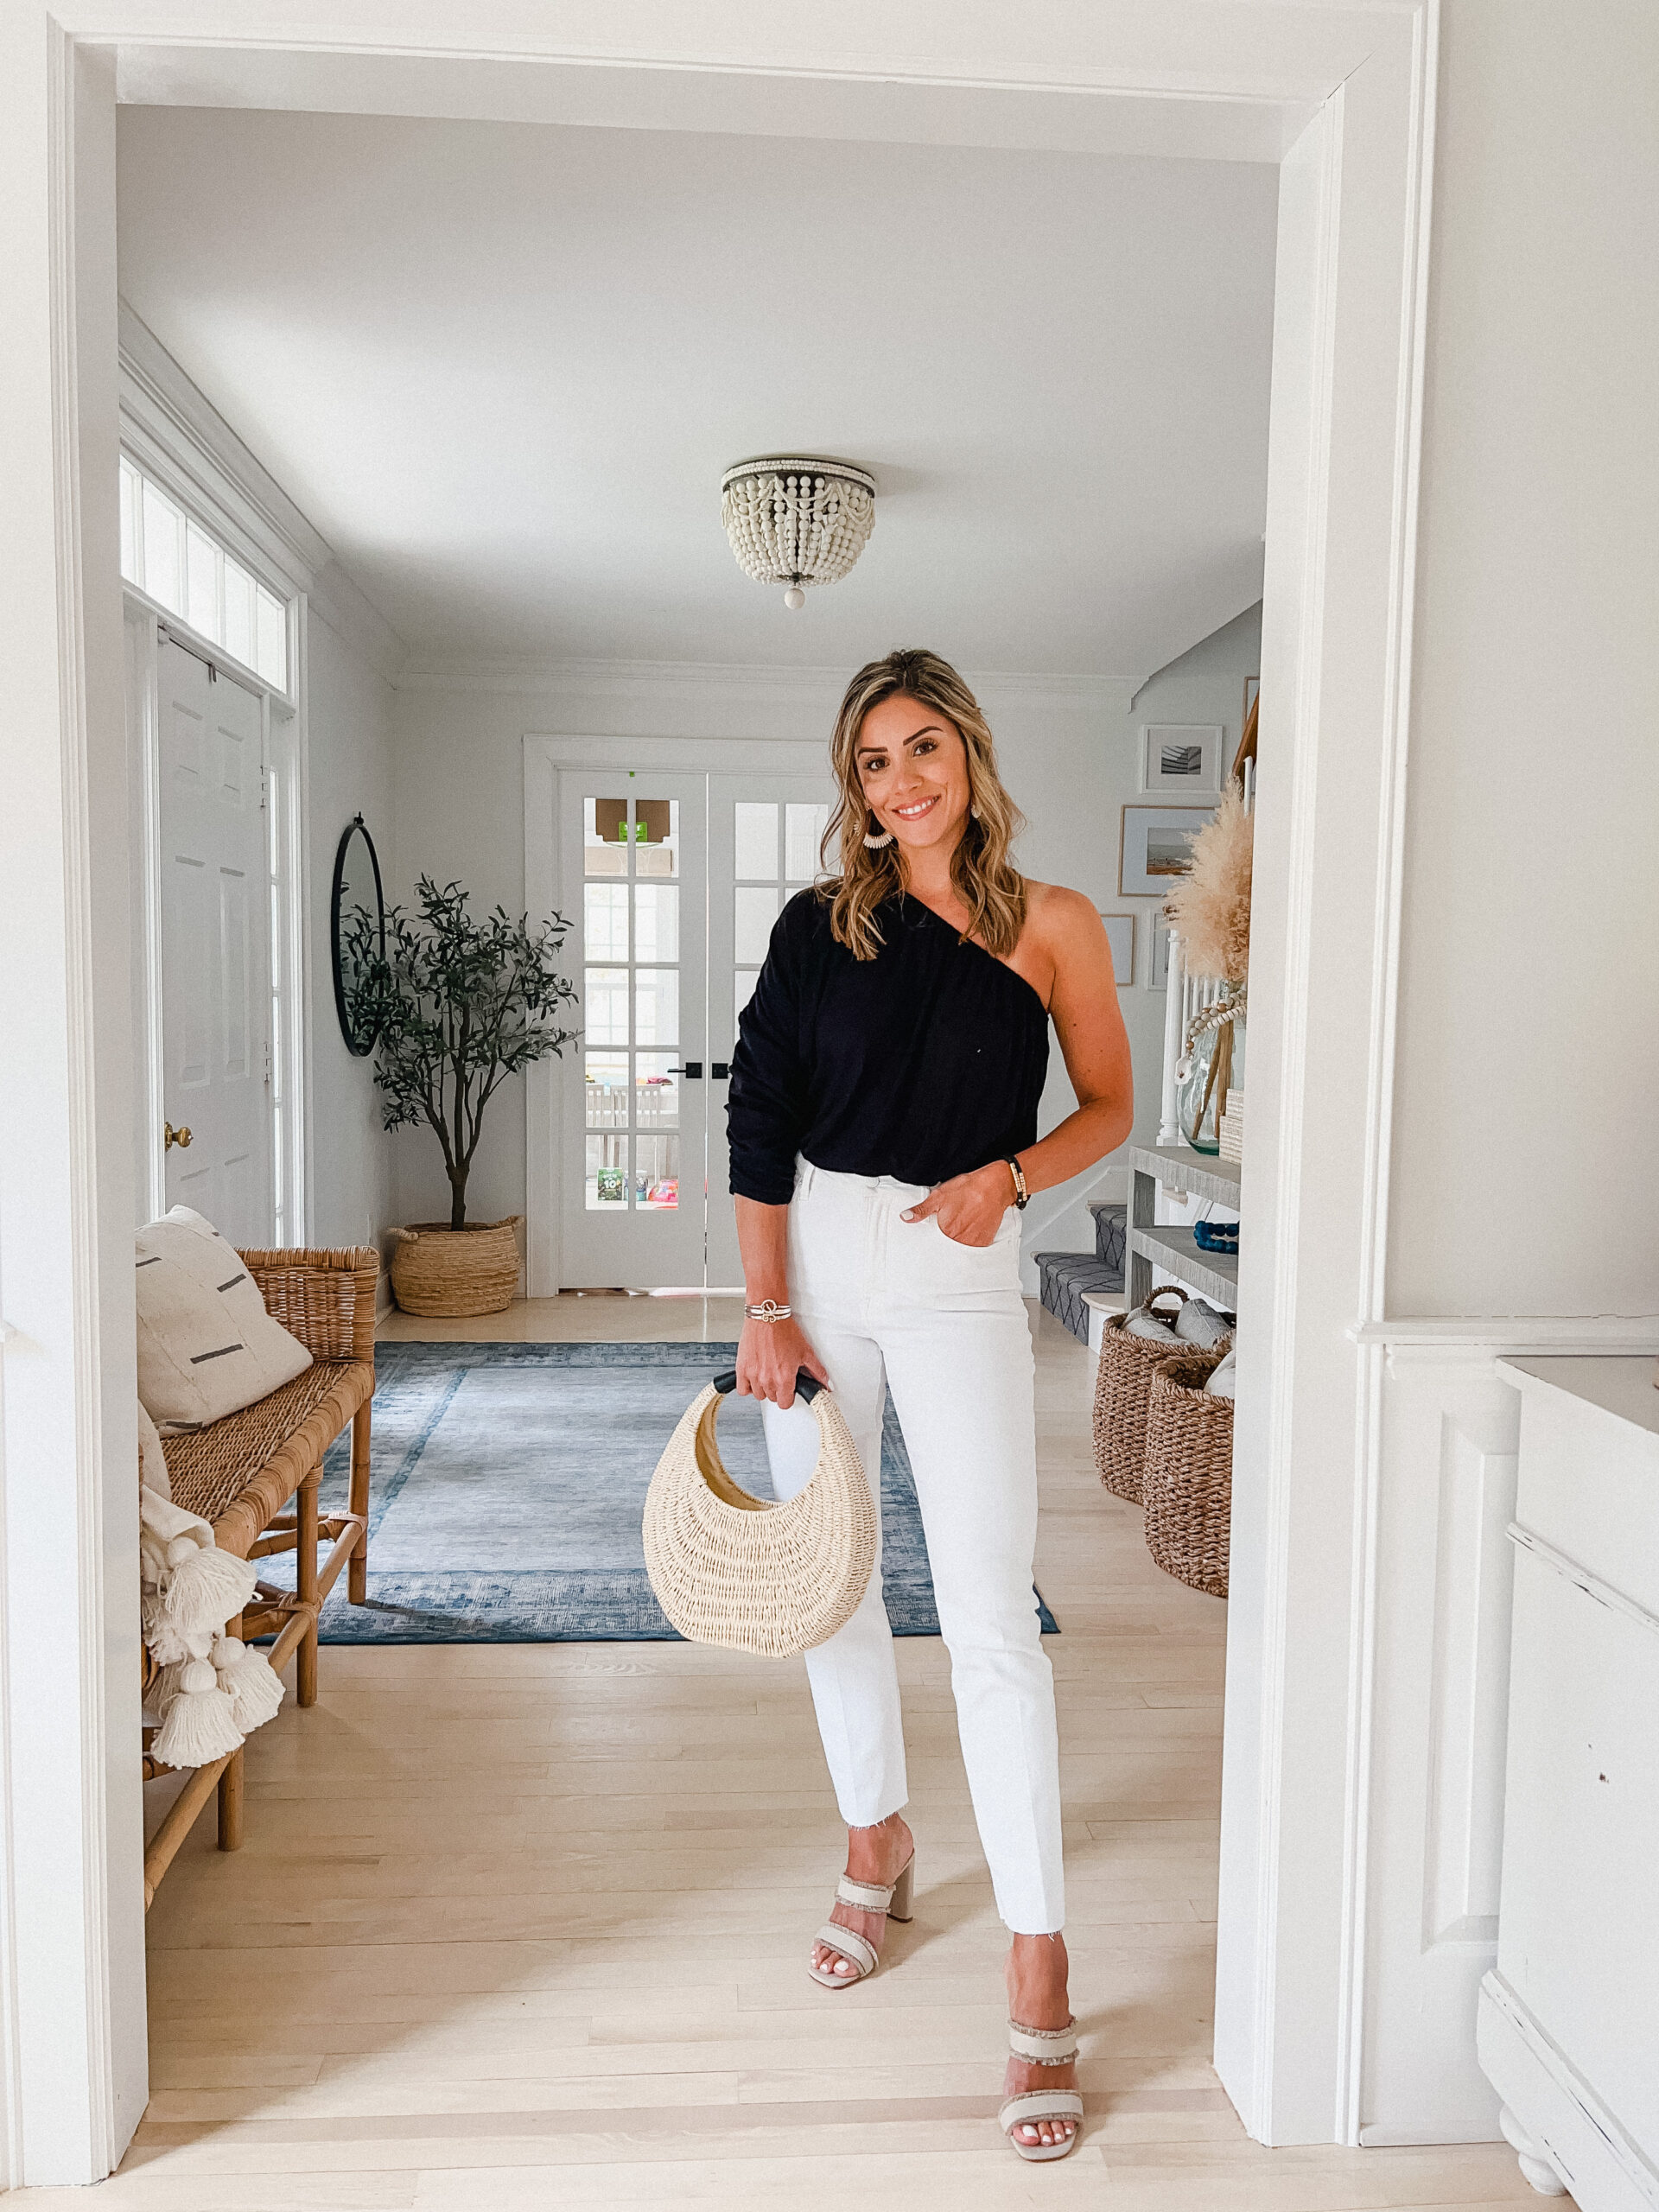 Connecticut life and style blogger Lauren McBride shares four spring date looks, from casual to dressier options.